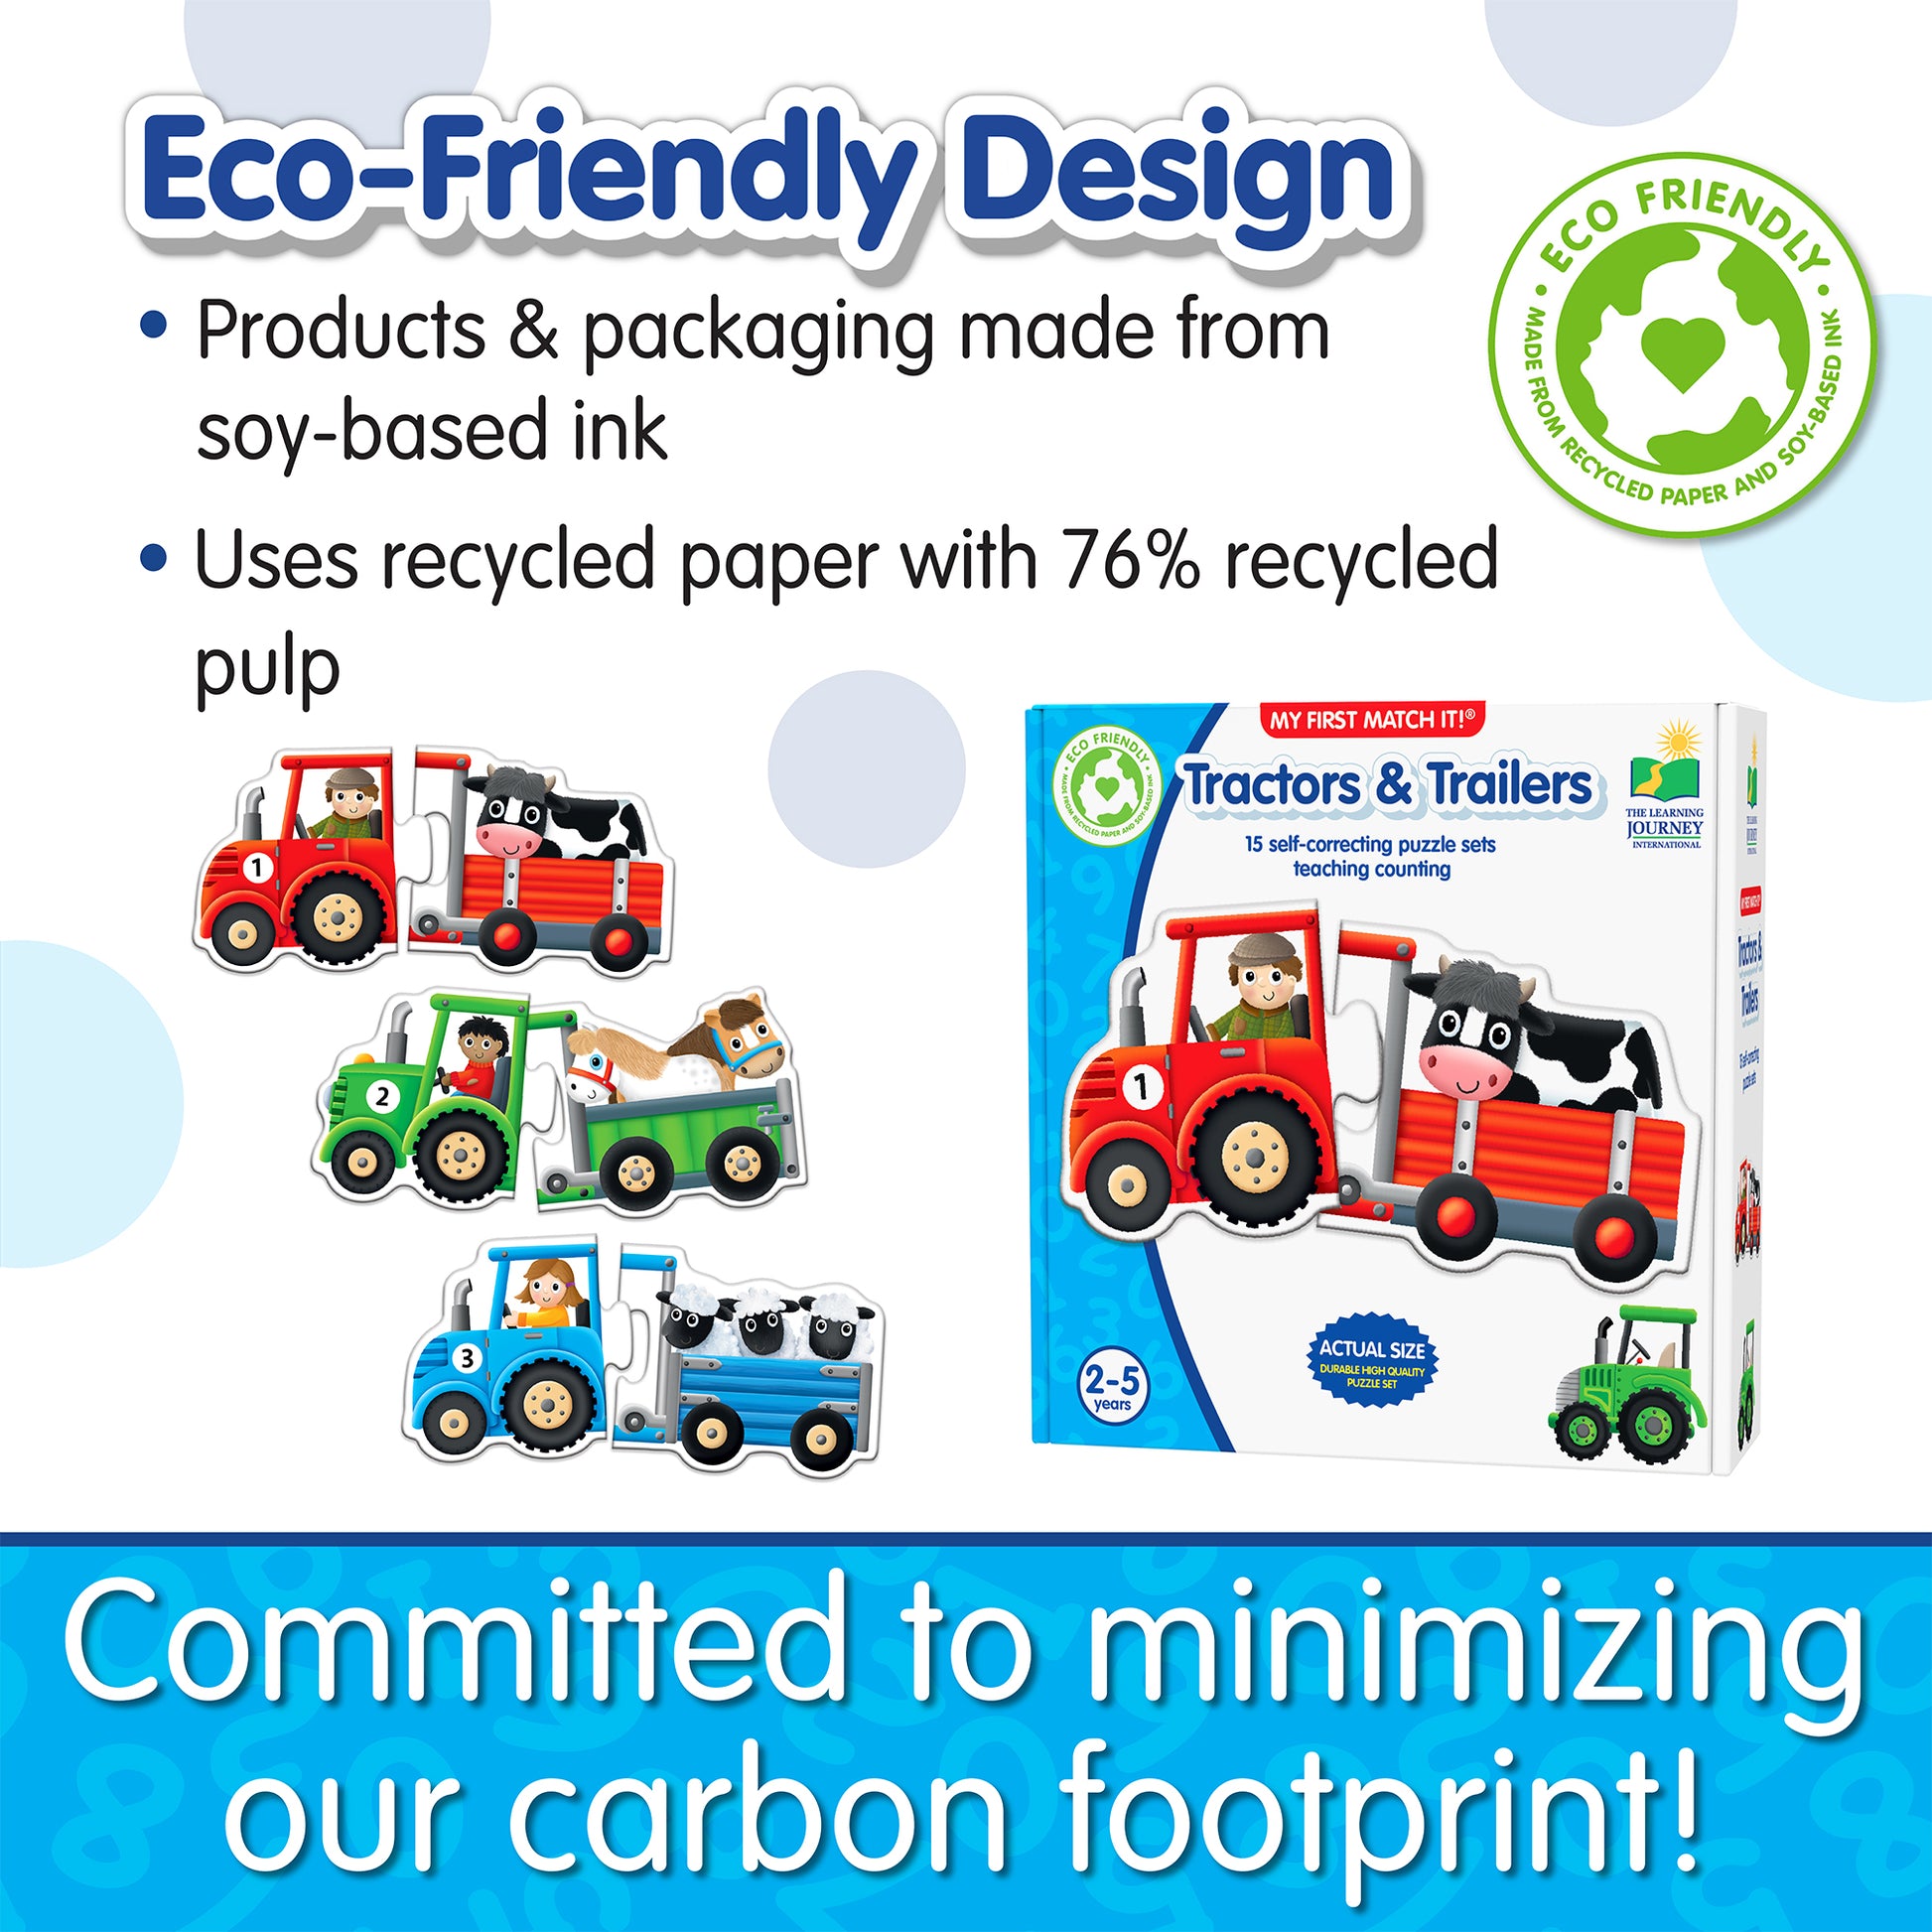 Infographic about Tractors and Trailers' eco-friendly design